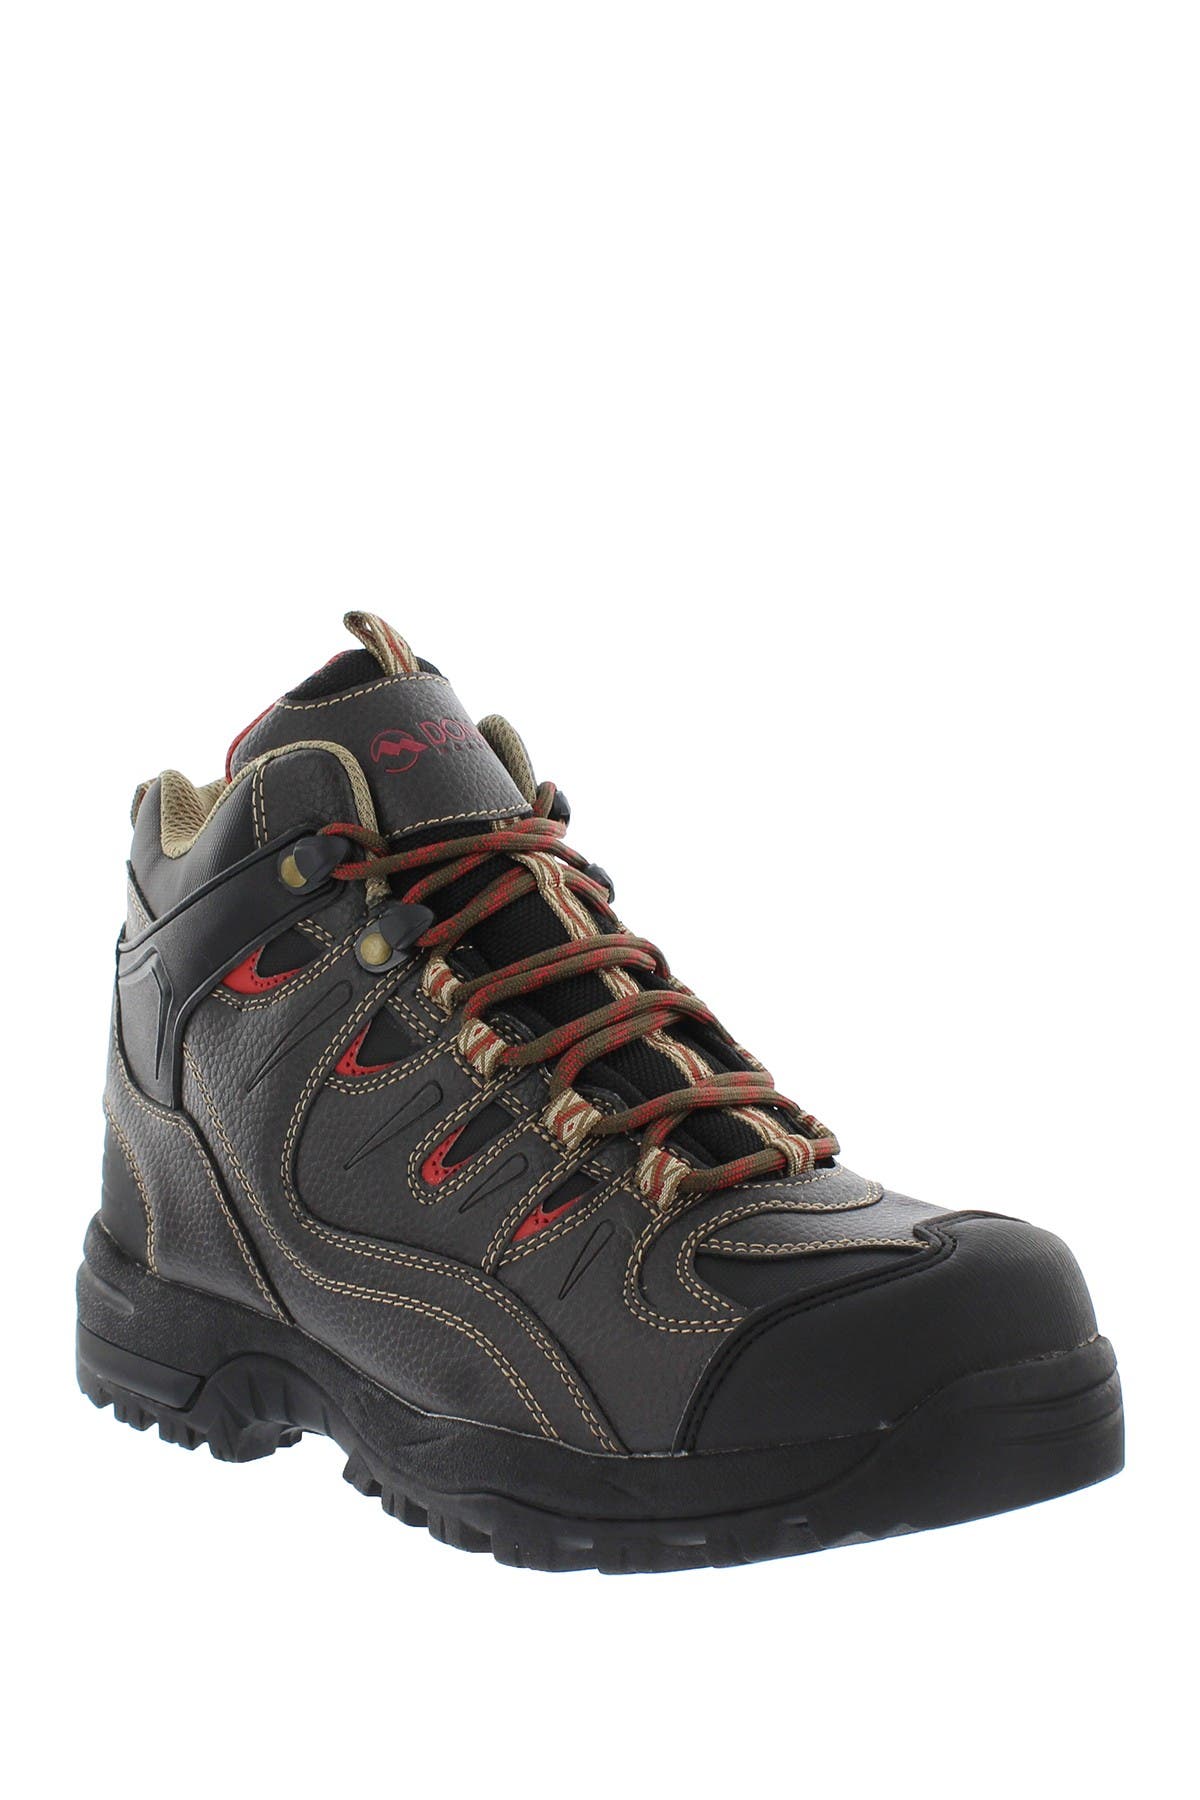 donner hiking boots